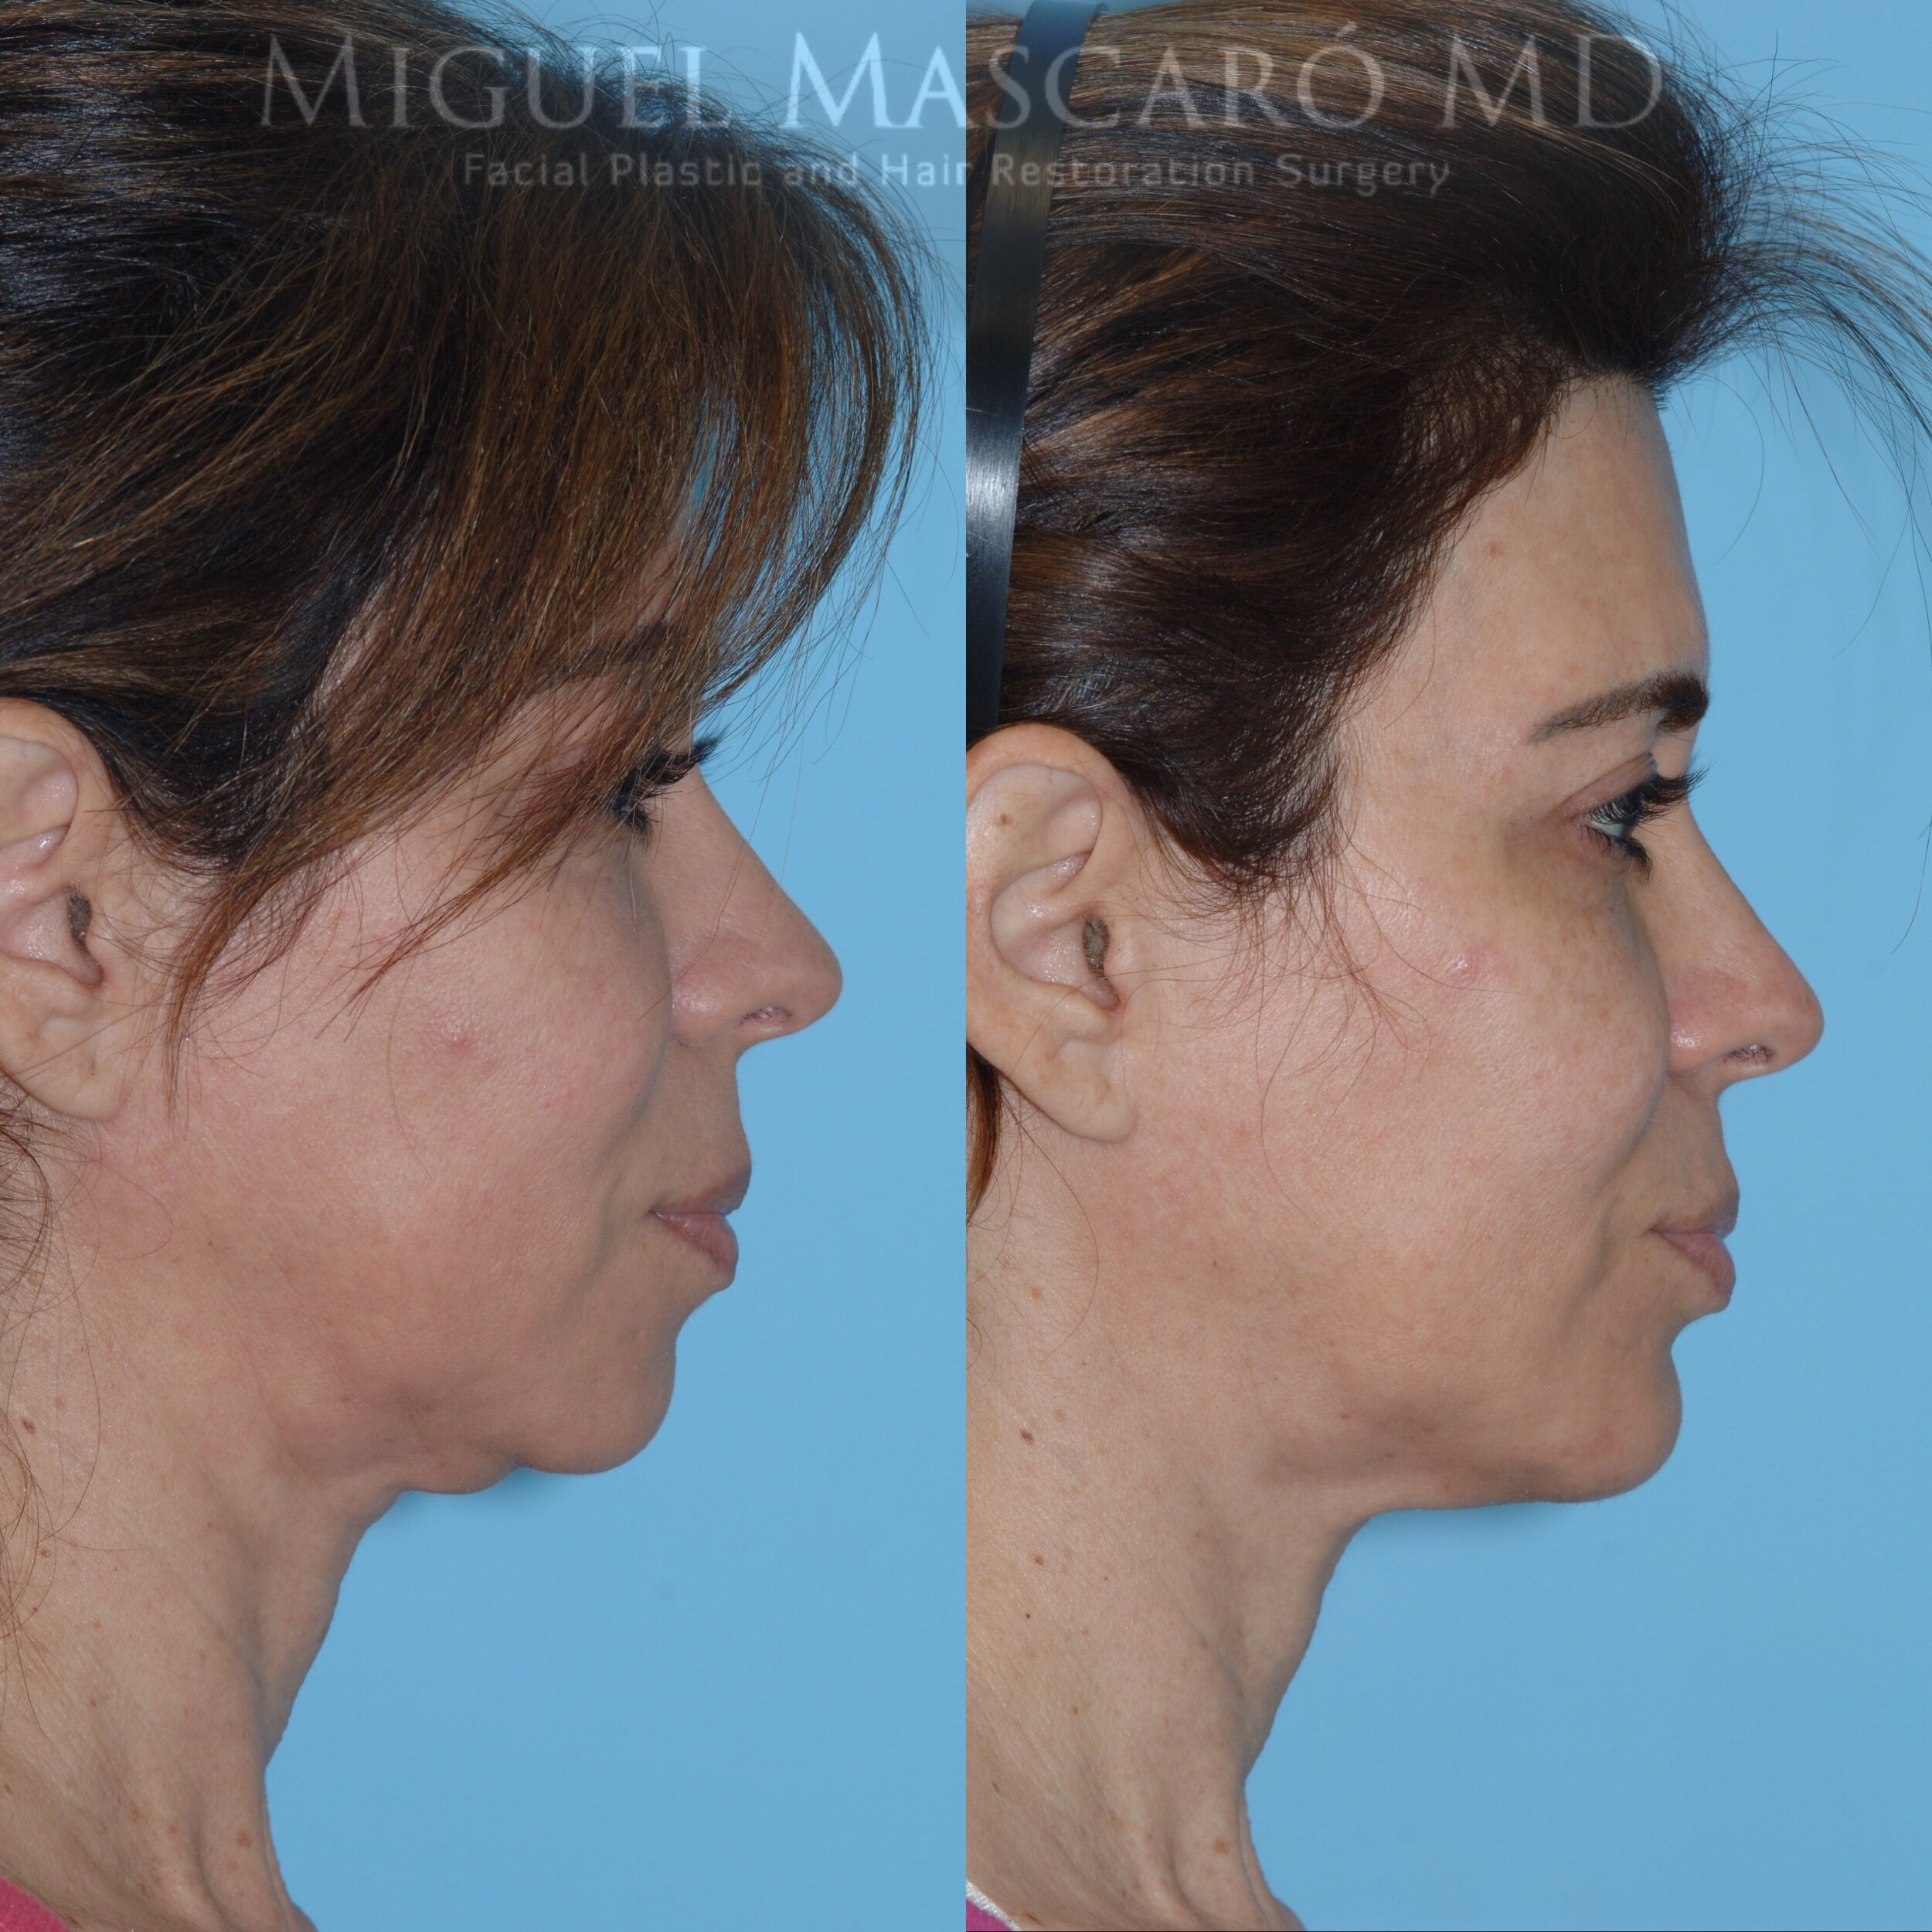  ThermiRF for minimally invasive skin tightening along jawline 